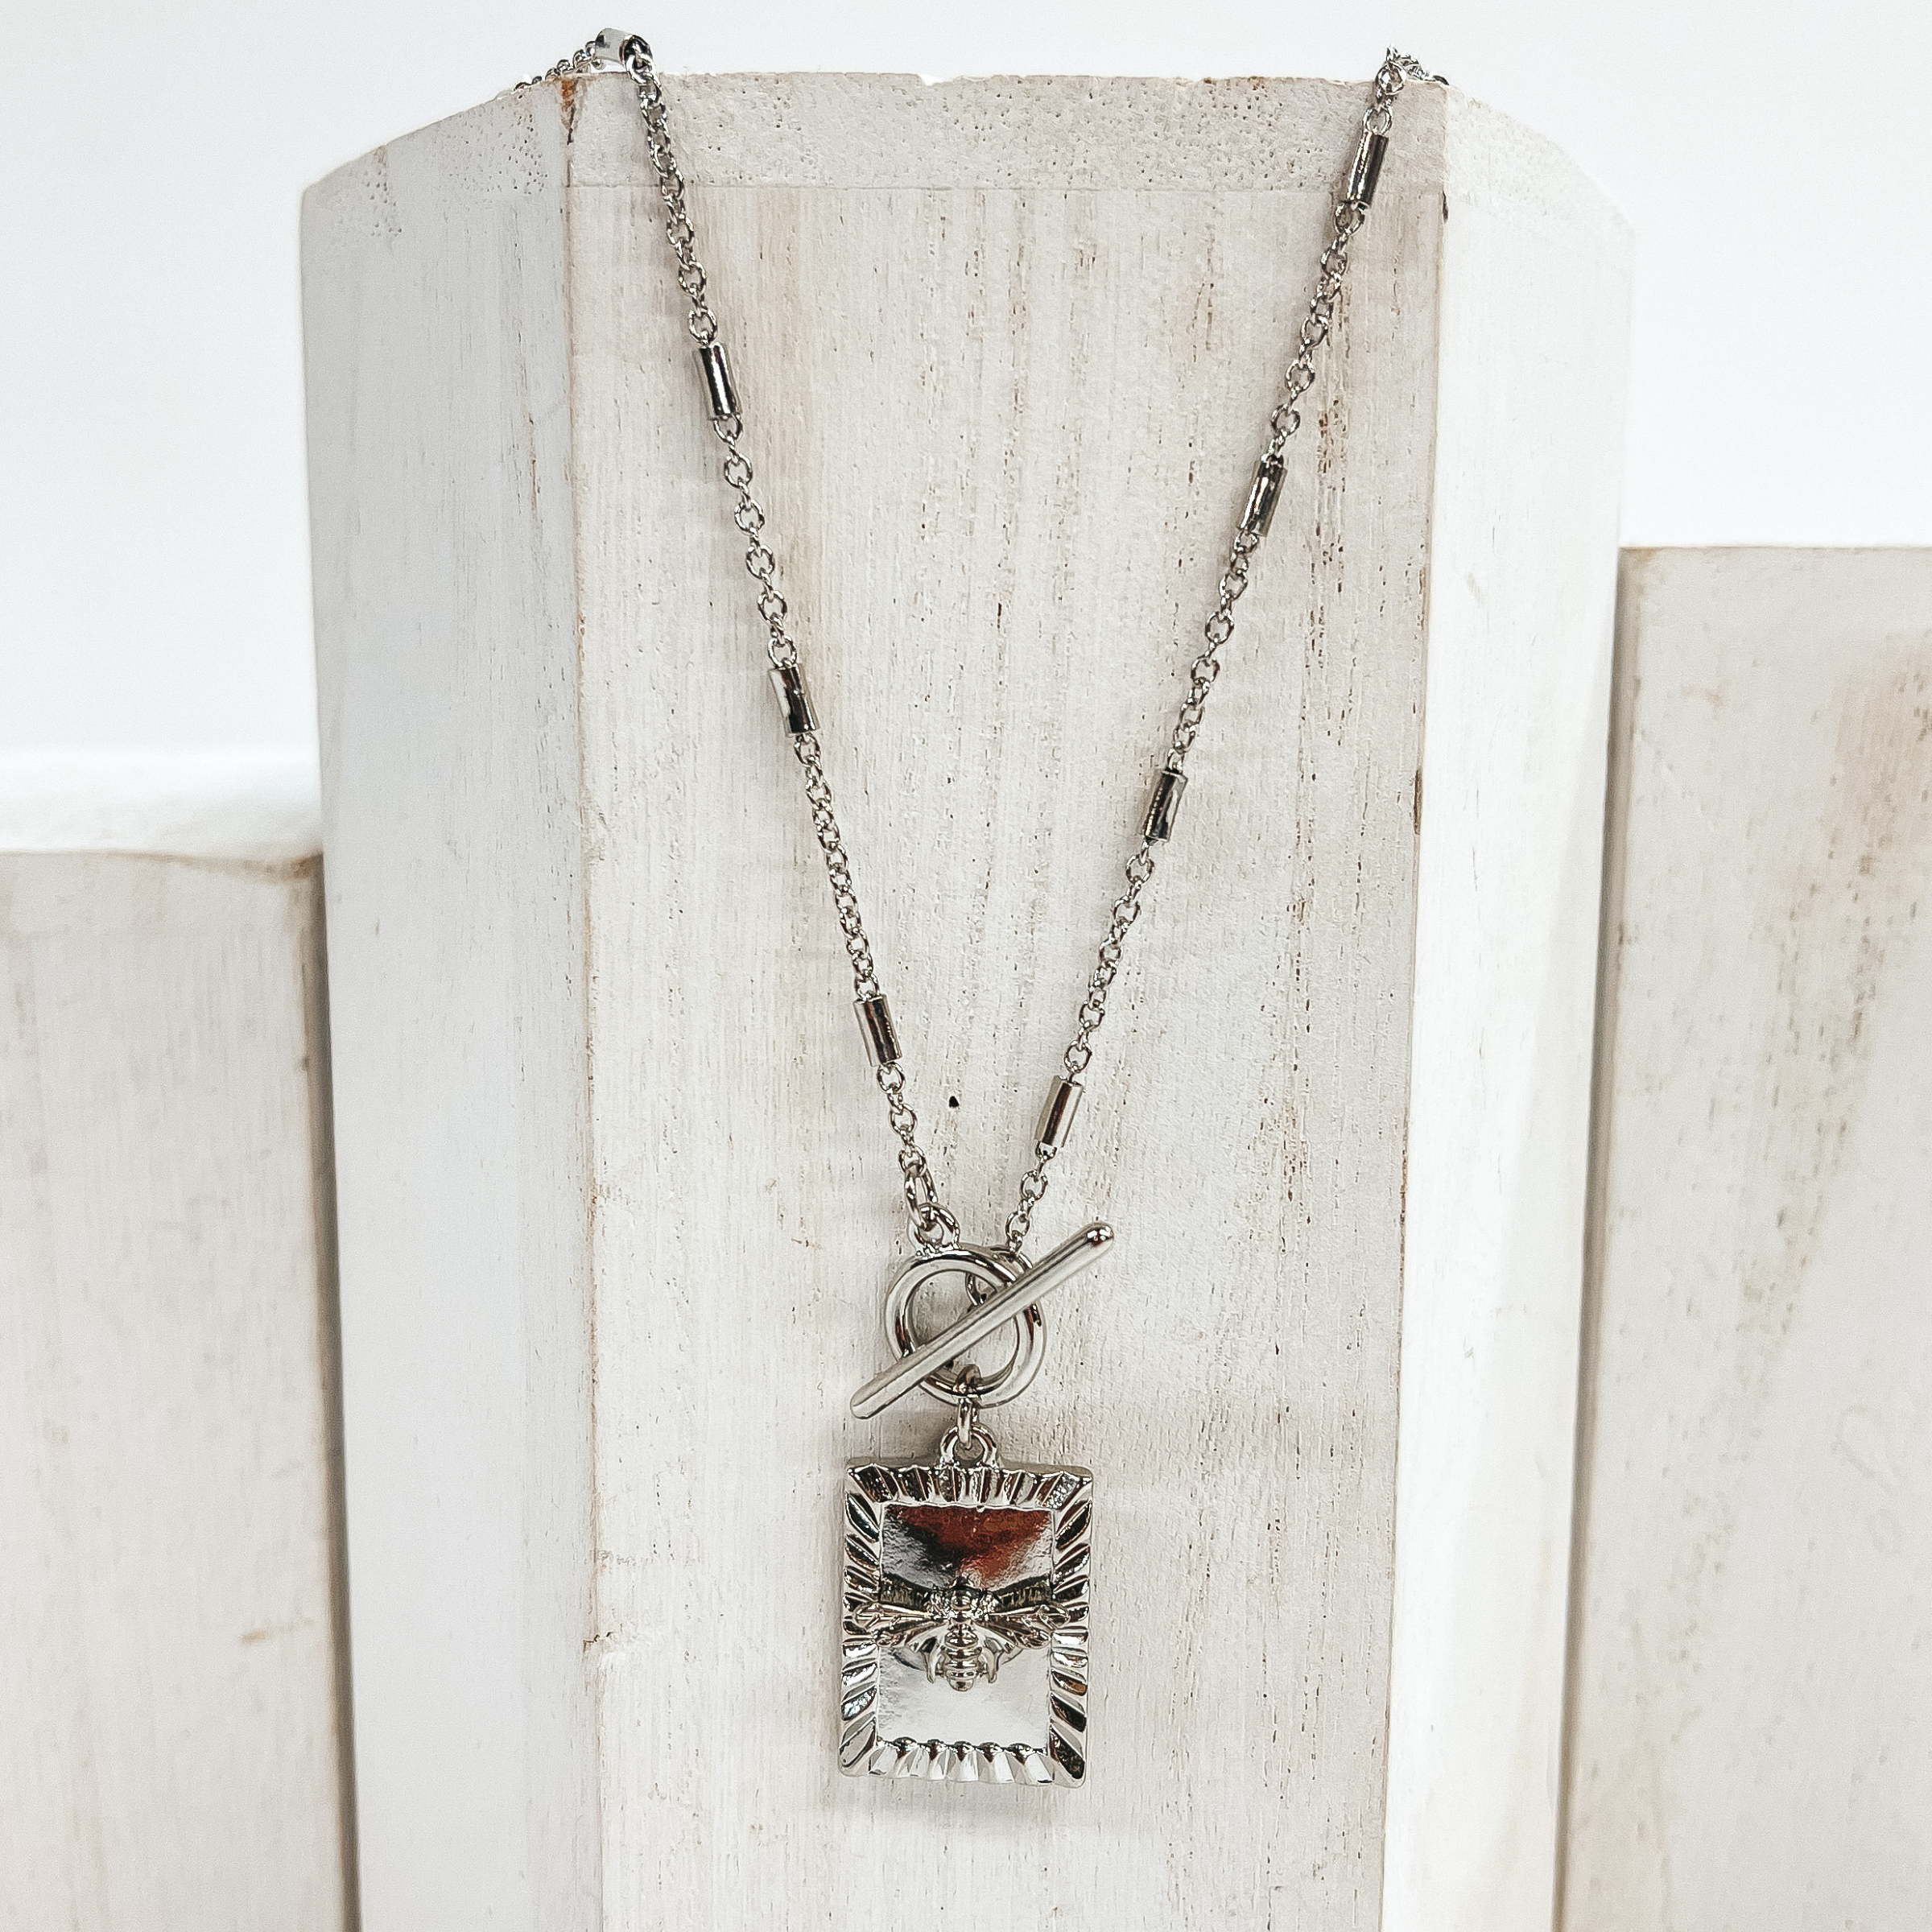 This is a silver necklace with silver spacers along  the chain. It has a front toggle clasp and a  square pendant with a bumble  bee charm. This necklace is pictured laying on a  white block and on a white background